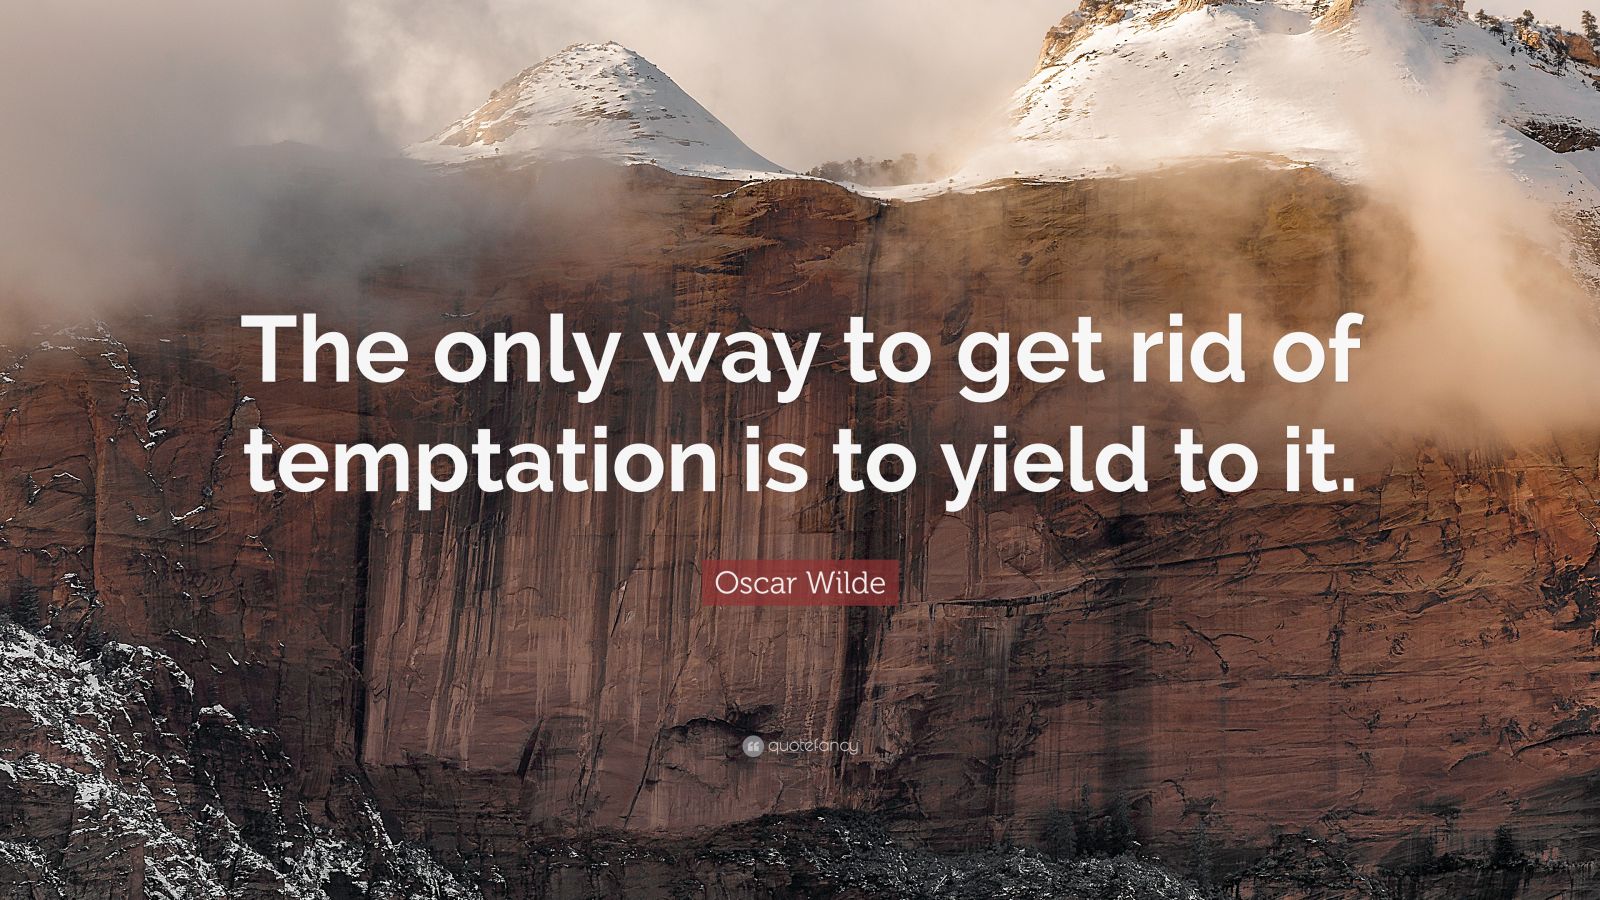 Oscar Wilde Quote: "The only way to get rid of temptation is to yield to it." (12 wallpapers ...